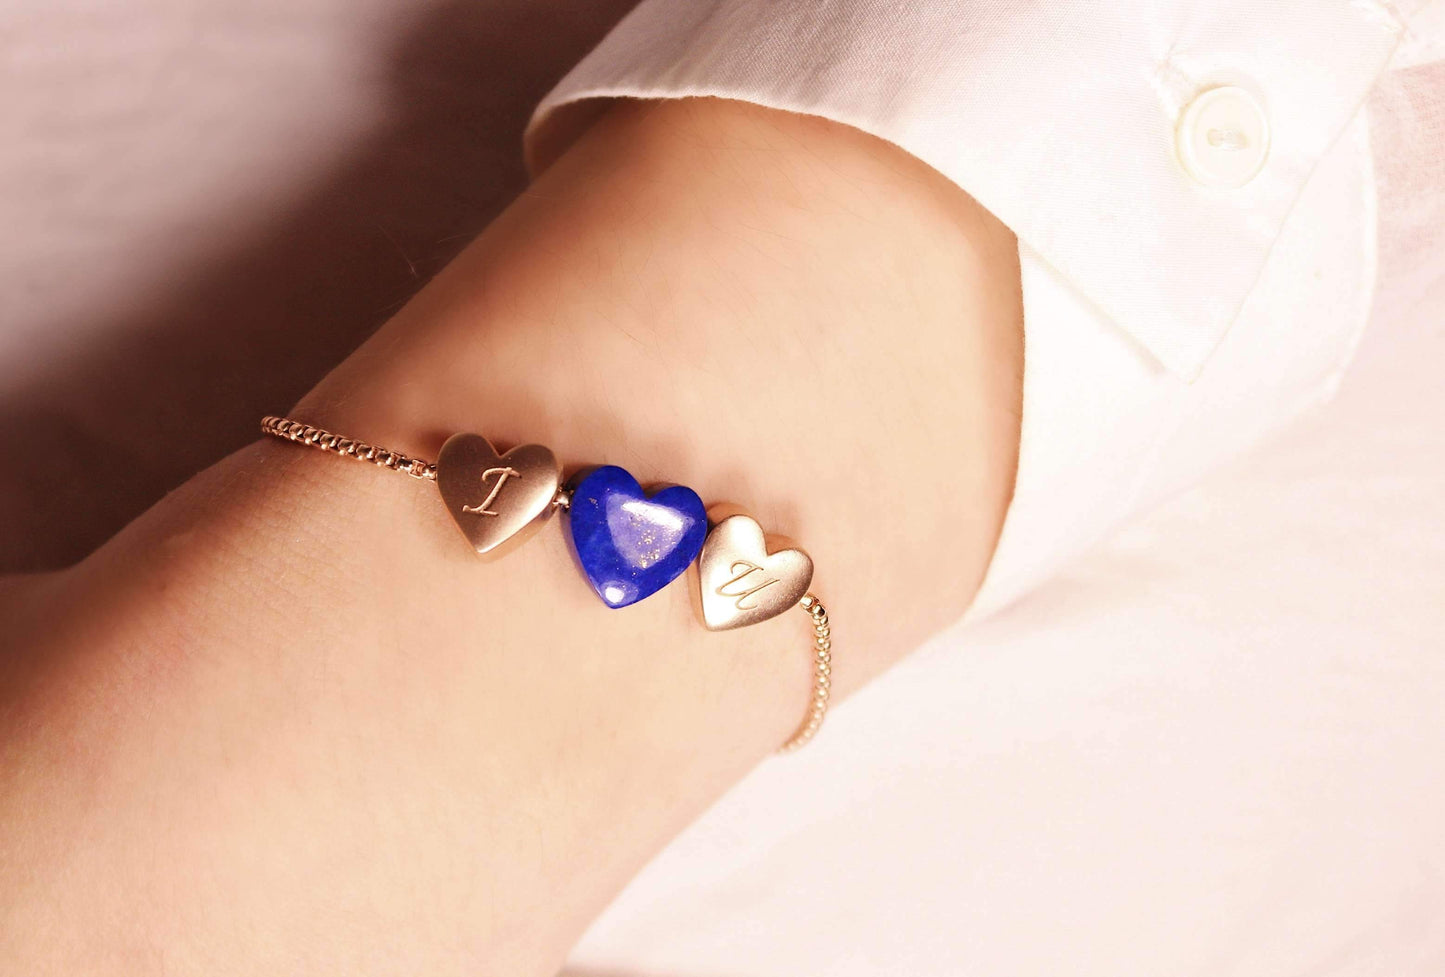 Luv Me Lapis Bolo Adjustable I Love You Heart Bracelet in 14K Rose Gold Plated Sterling Silver by LuvMyJewelry